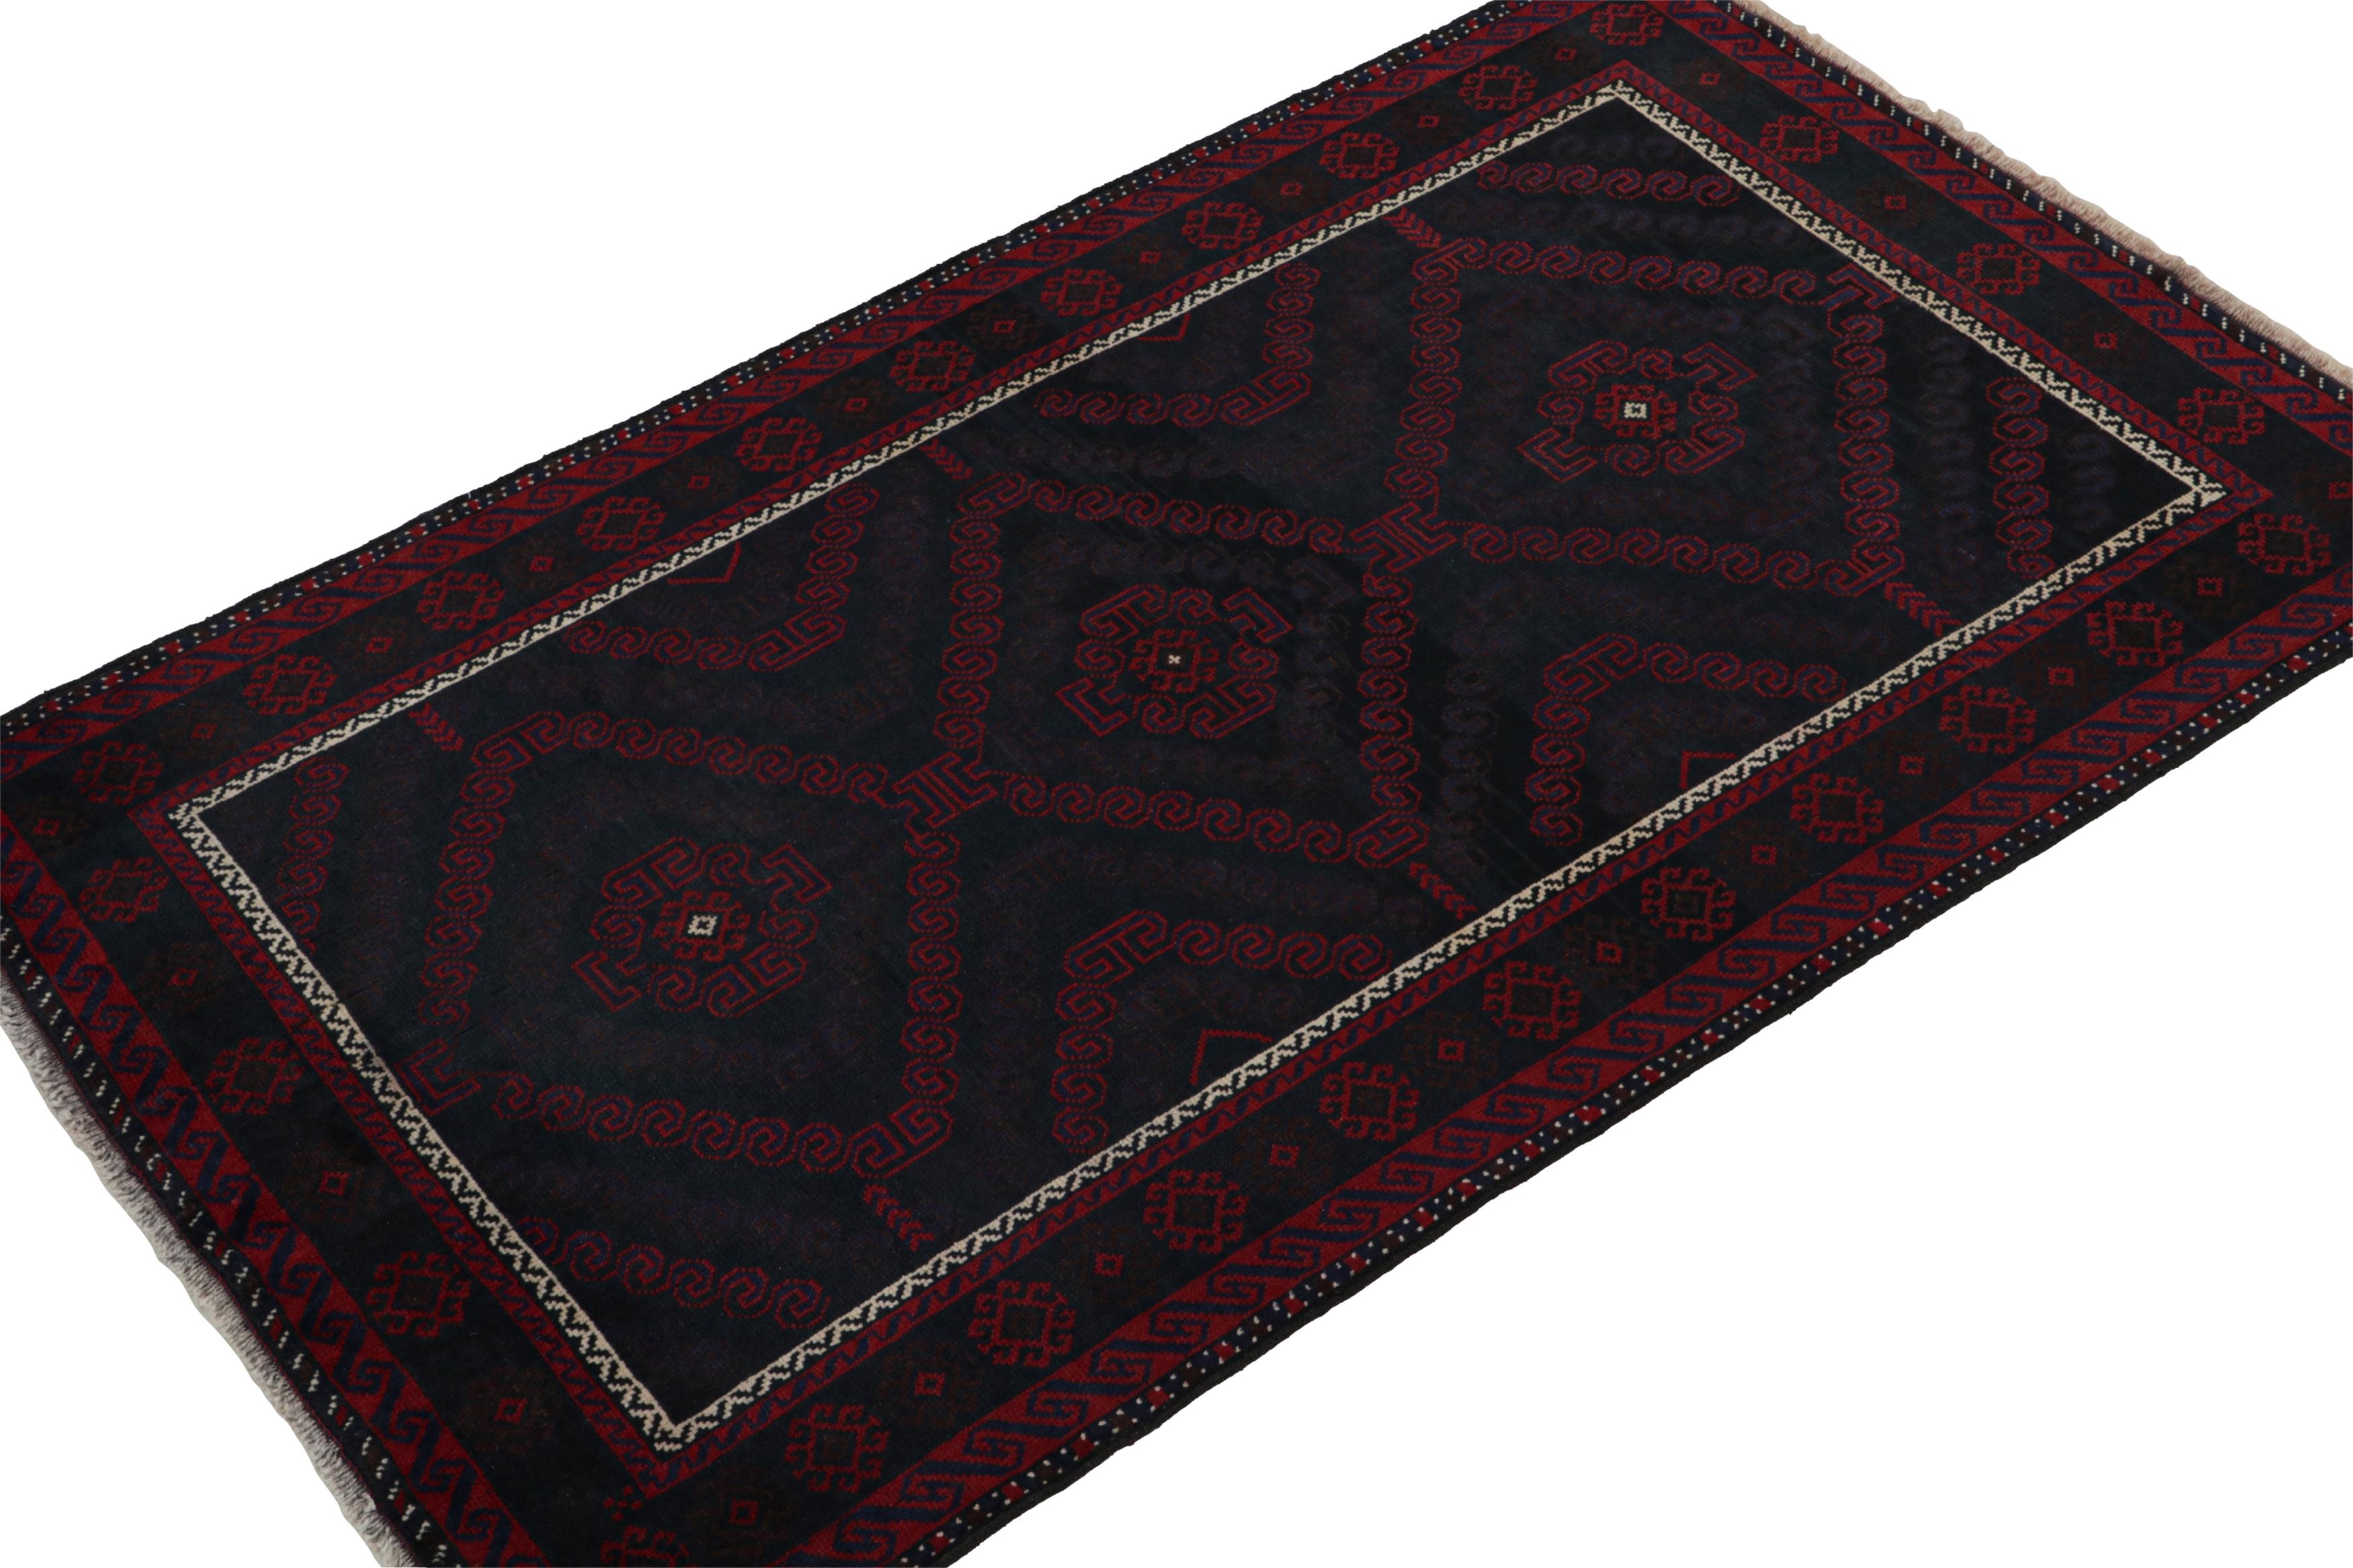 Hand-knotted in wool, this 4x7 Baluch Persian rug of the 1950s is the latest to enter Rug & Kilim’s Antique & Vintage collection.

On the Design:

The piece features tribal geometric patterns in tones of red & blue with fine white detailing. A keen